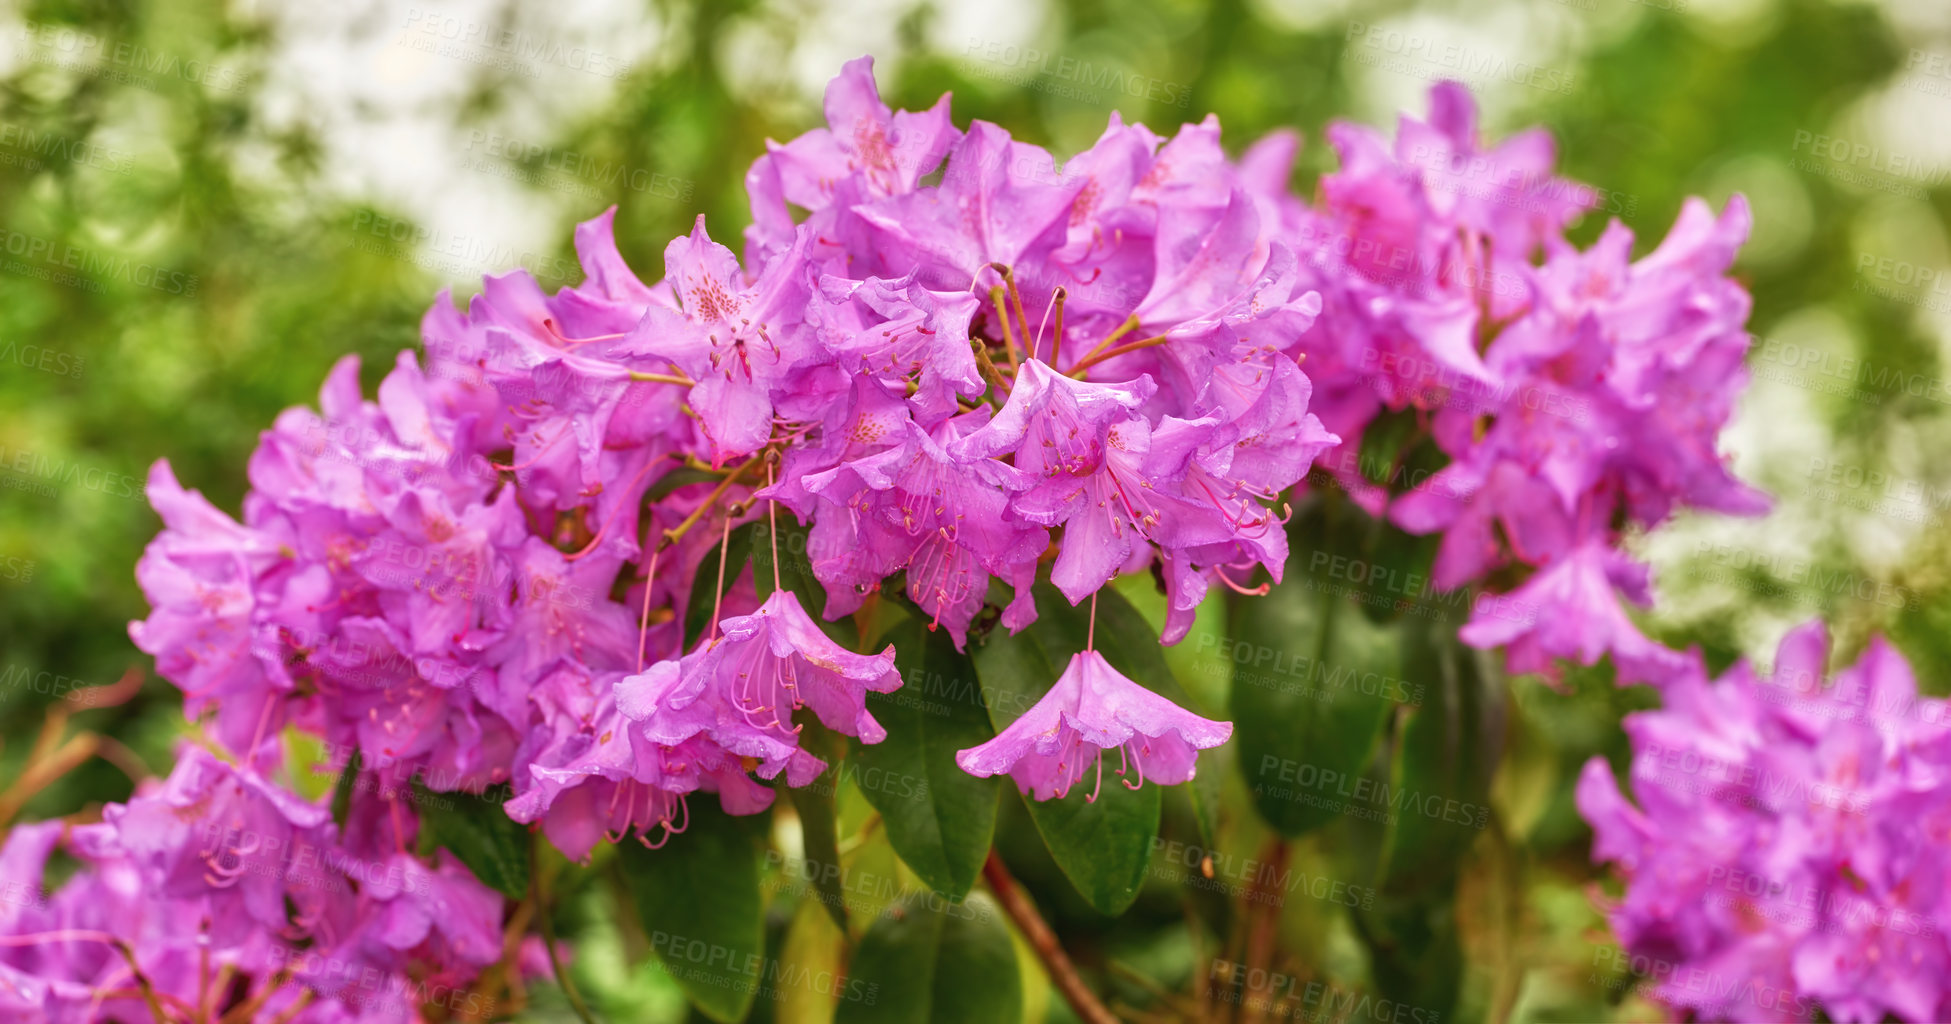 Buy stock photo Rhododendron is a genus of 1,024 species of woody plants in the heath family, either evergreen or deciduous, and found mainly in Asia, although it is also widespread throughout the Southern Highlands of the Appalachian Mountains of North America.